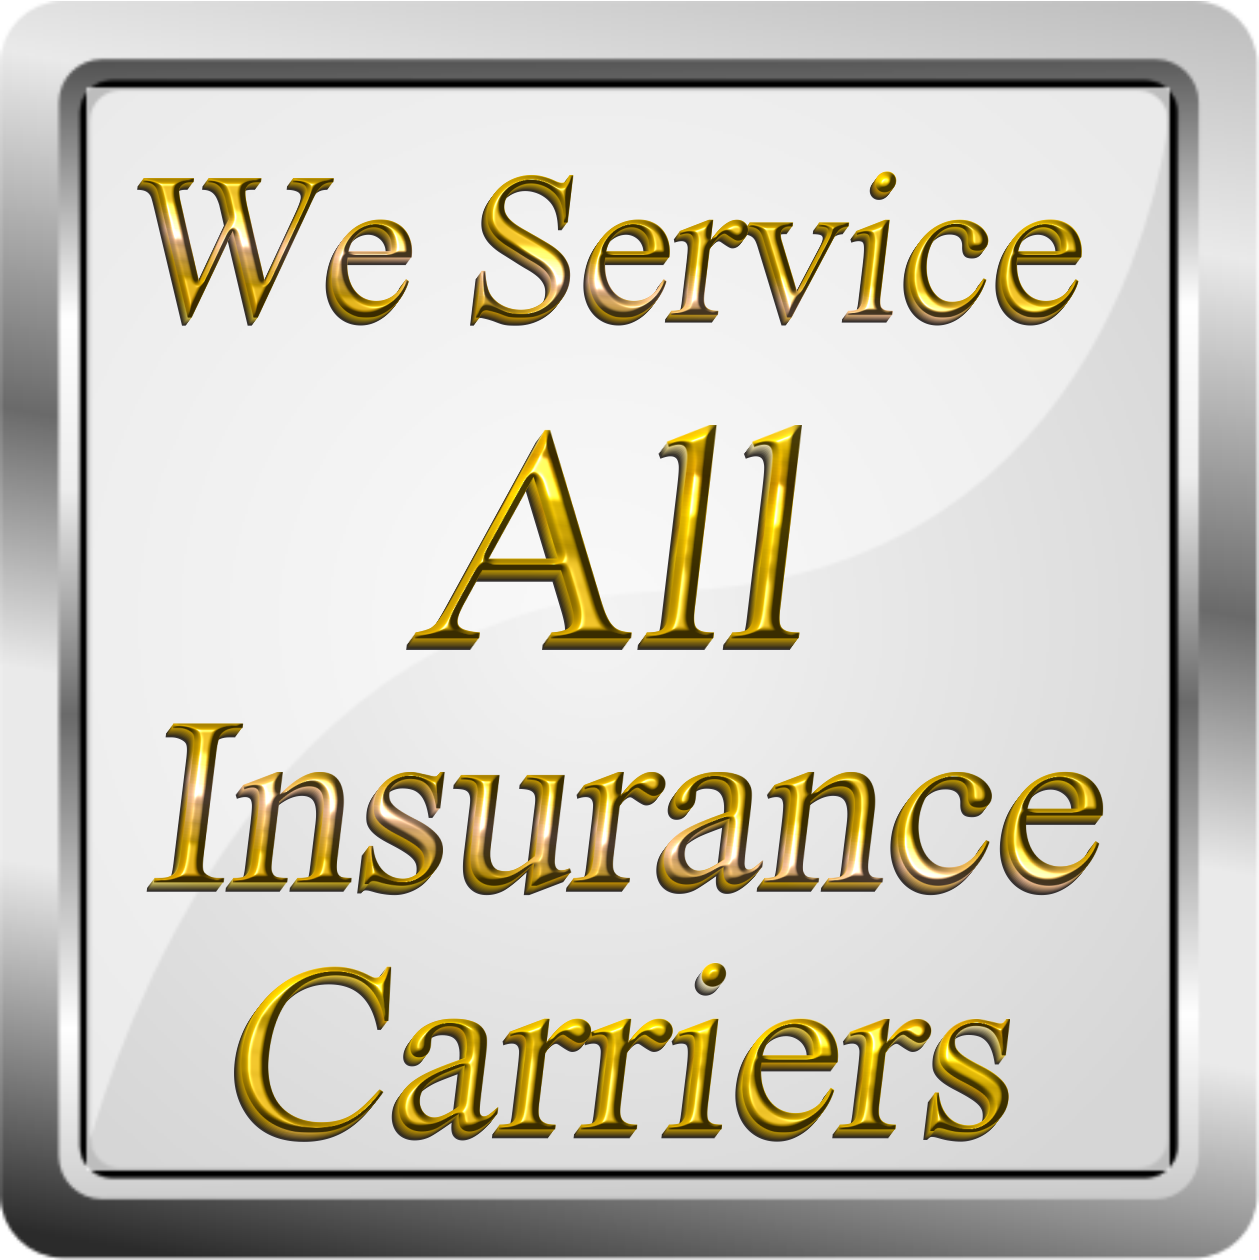 We Service All Insurance Carriers